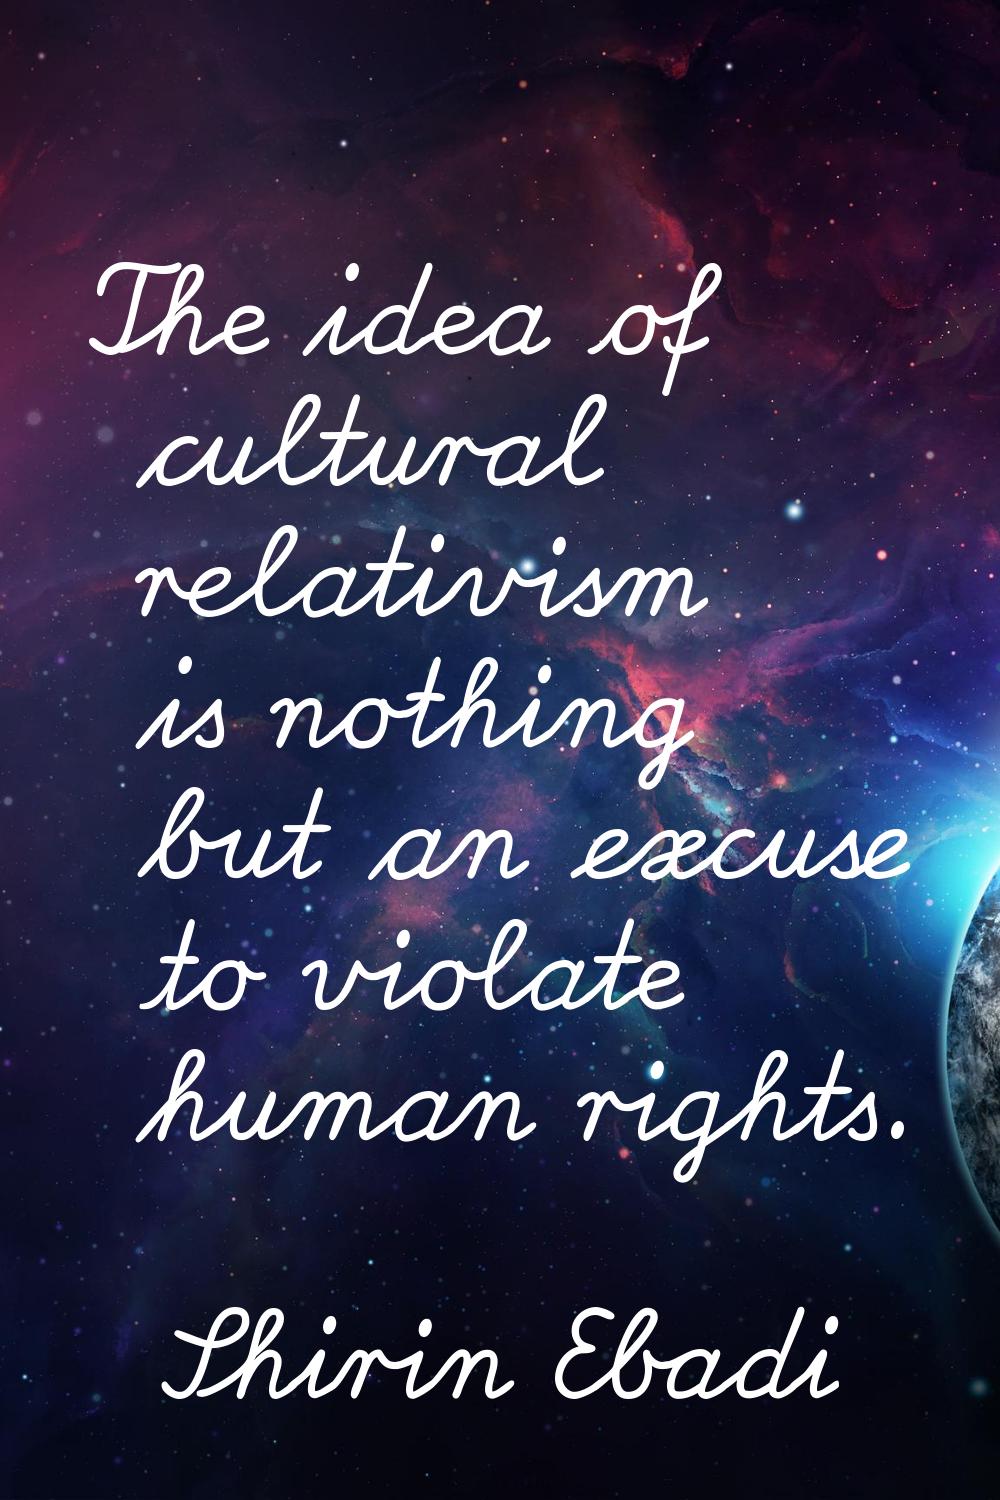 The idea of cultural relativism is nothing but an excuse to violate human rights.